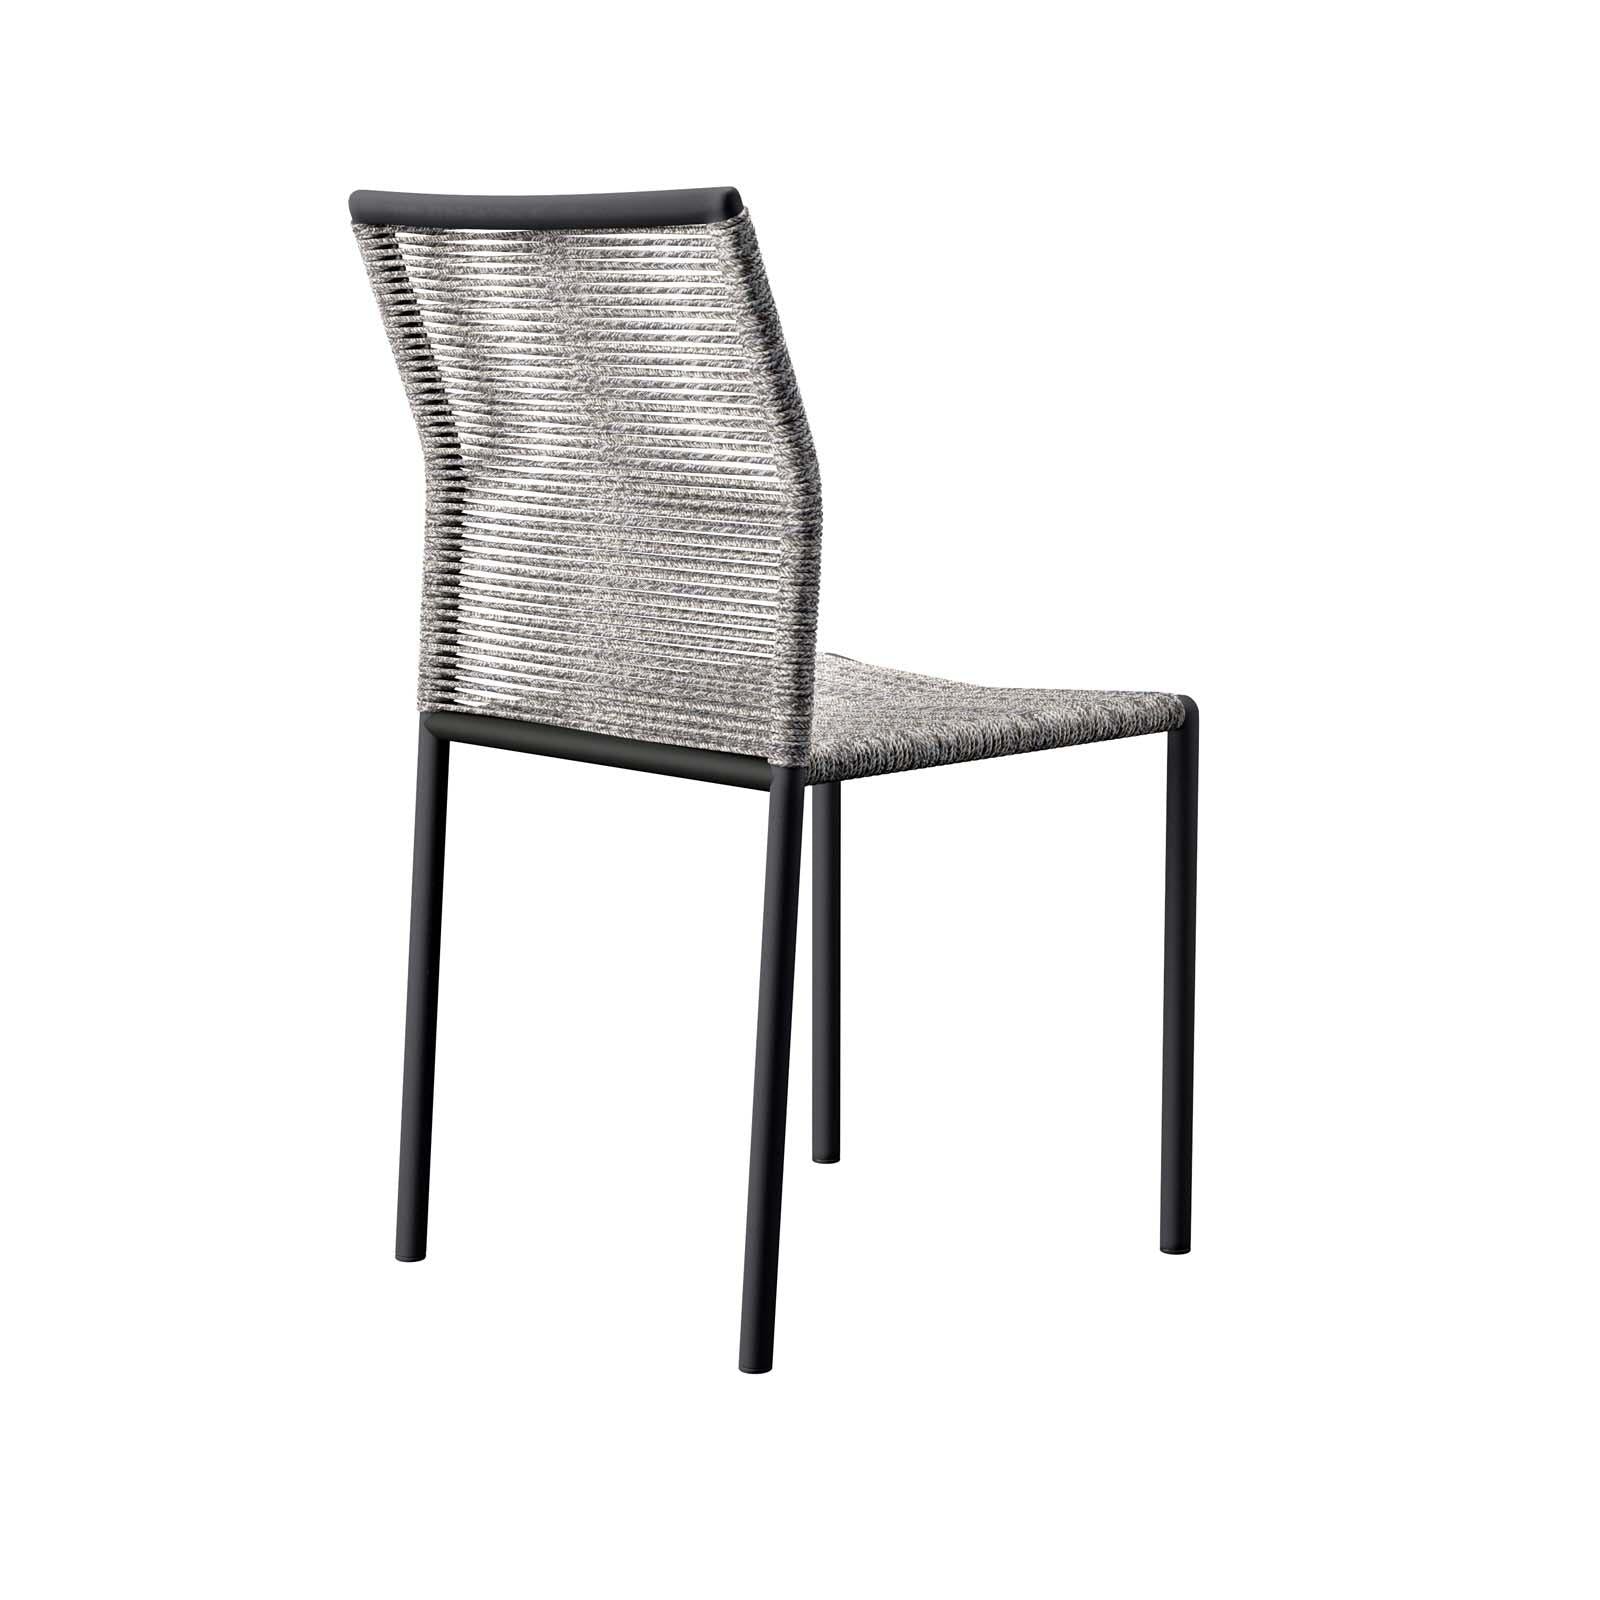 Modway Furniture Modern Serenity Outdoor Patio Chairs Set of 2 - EEI-5032